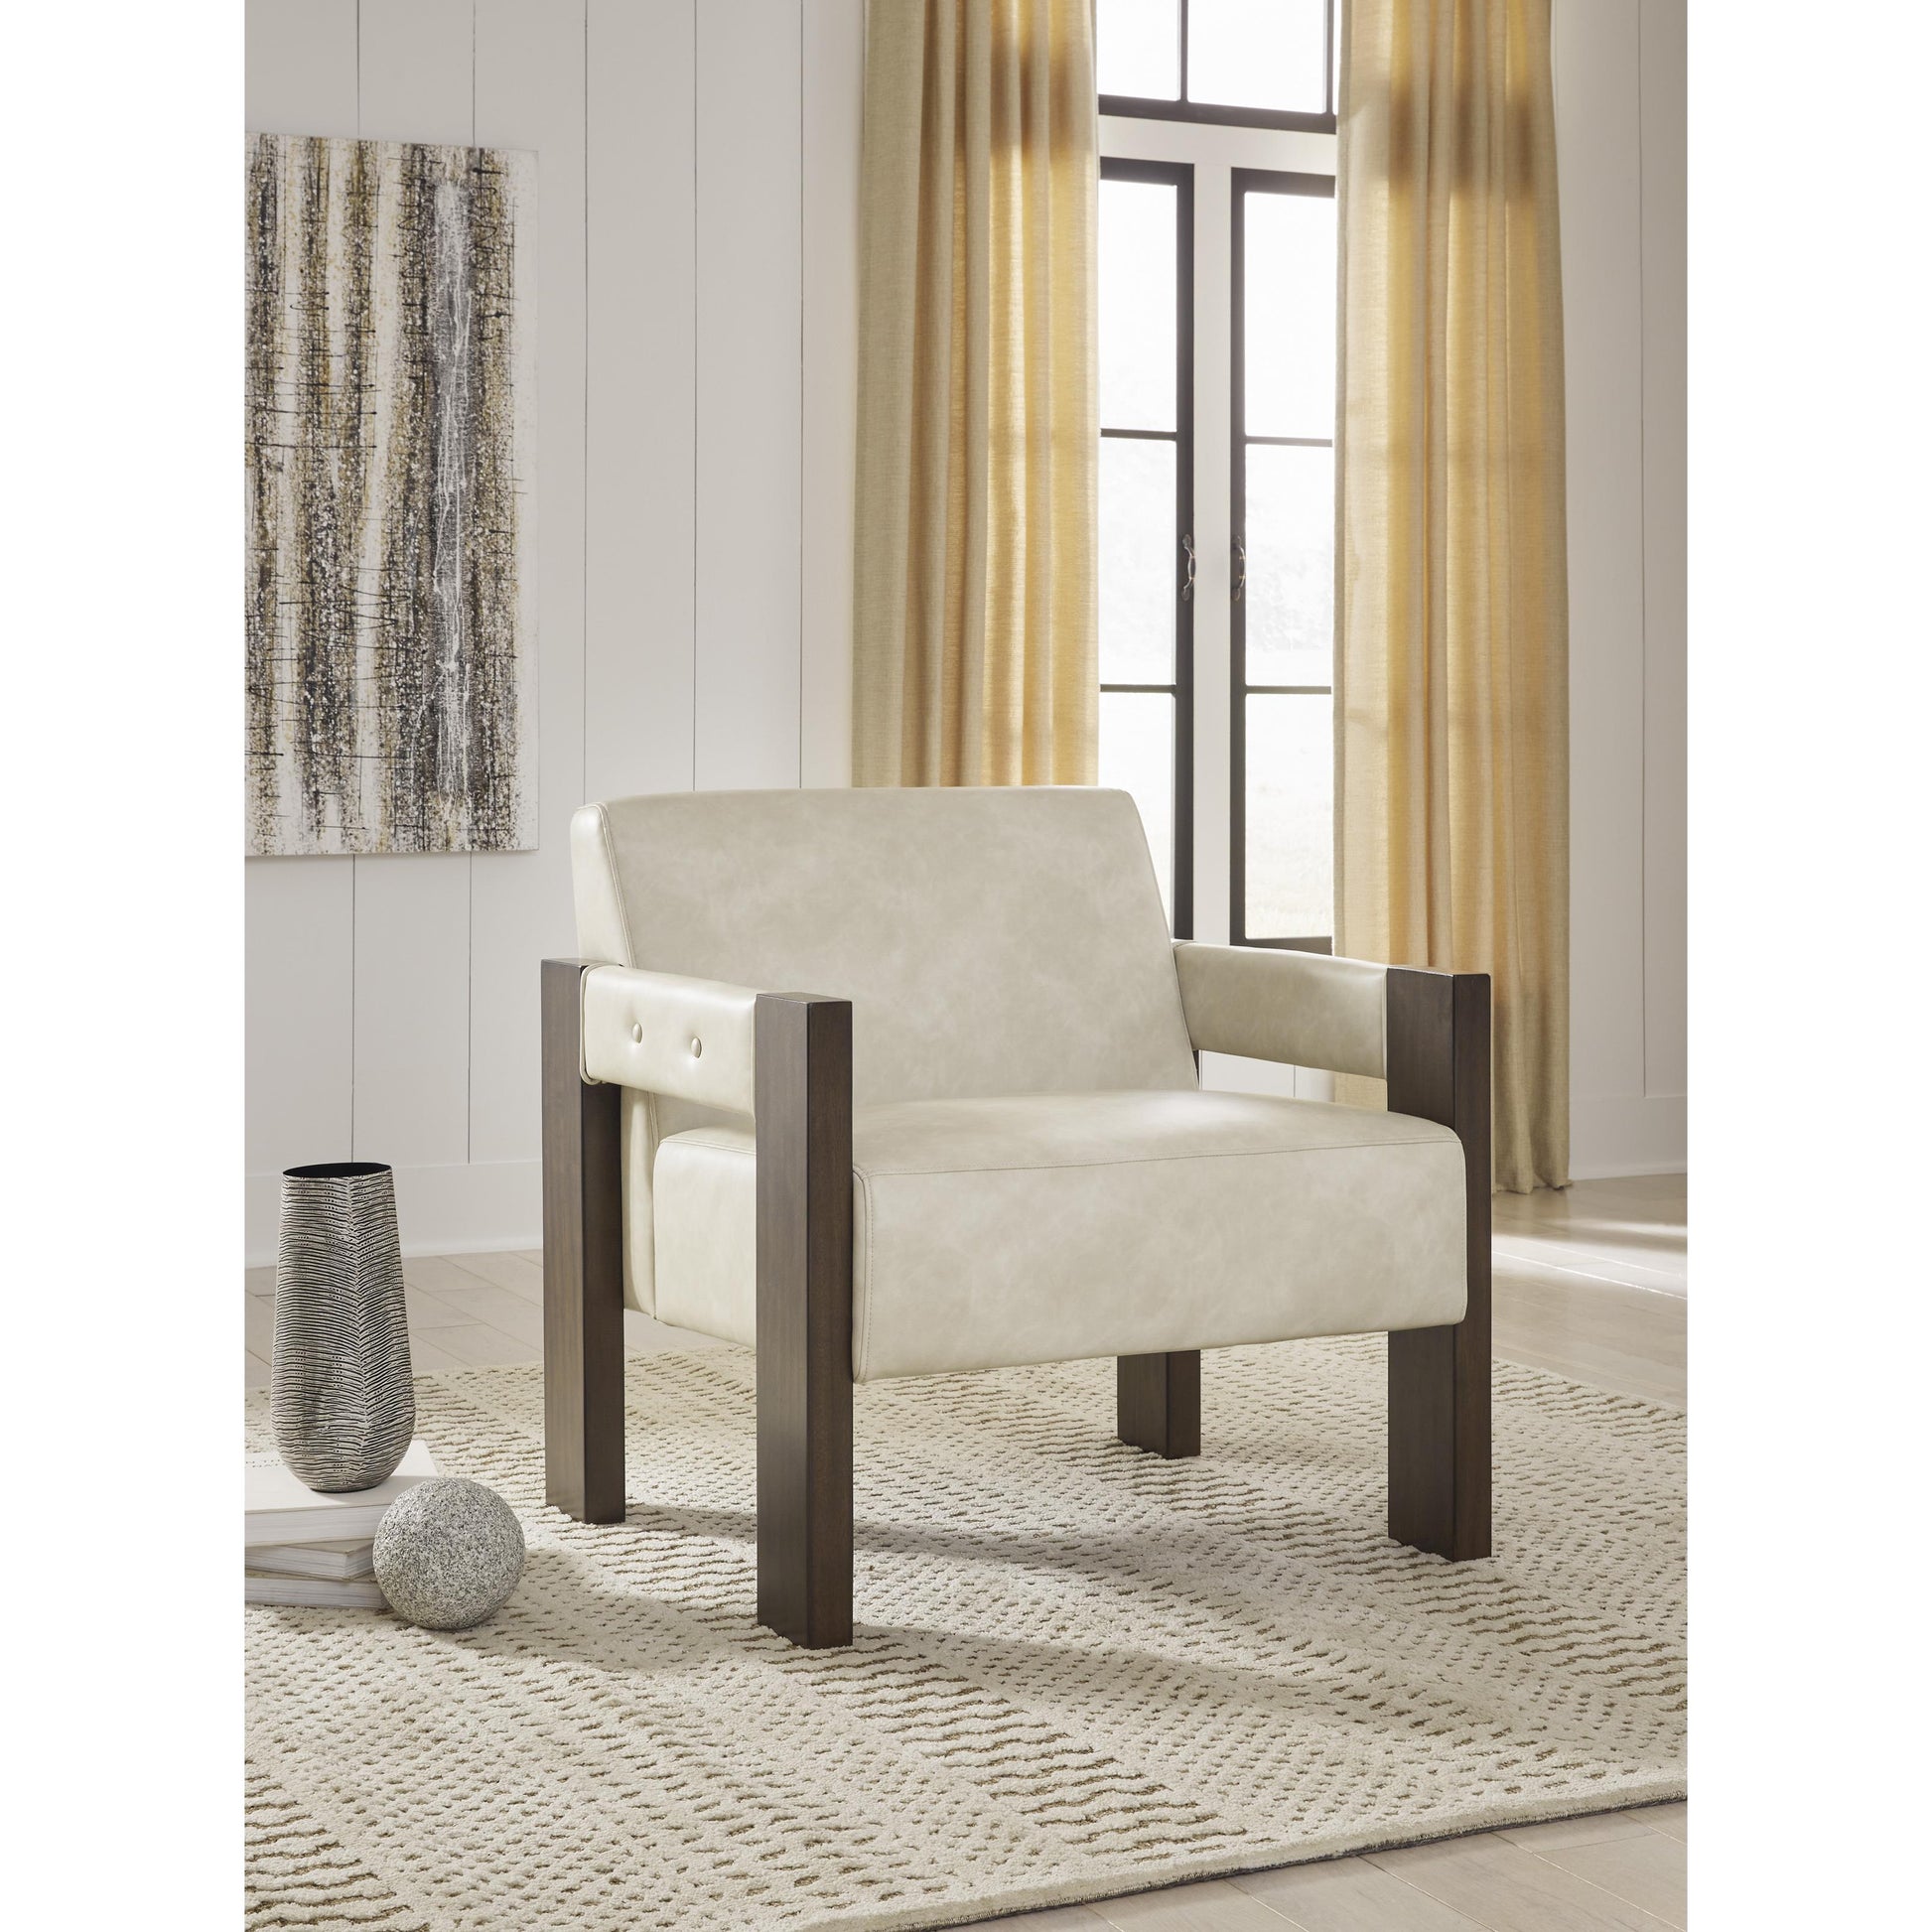 Signature Design by Ashley Adlanlock Accent Chair A3000694 IMAGE 5